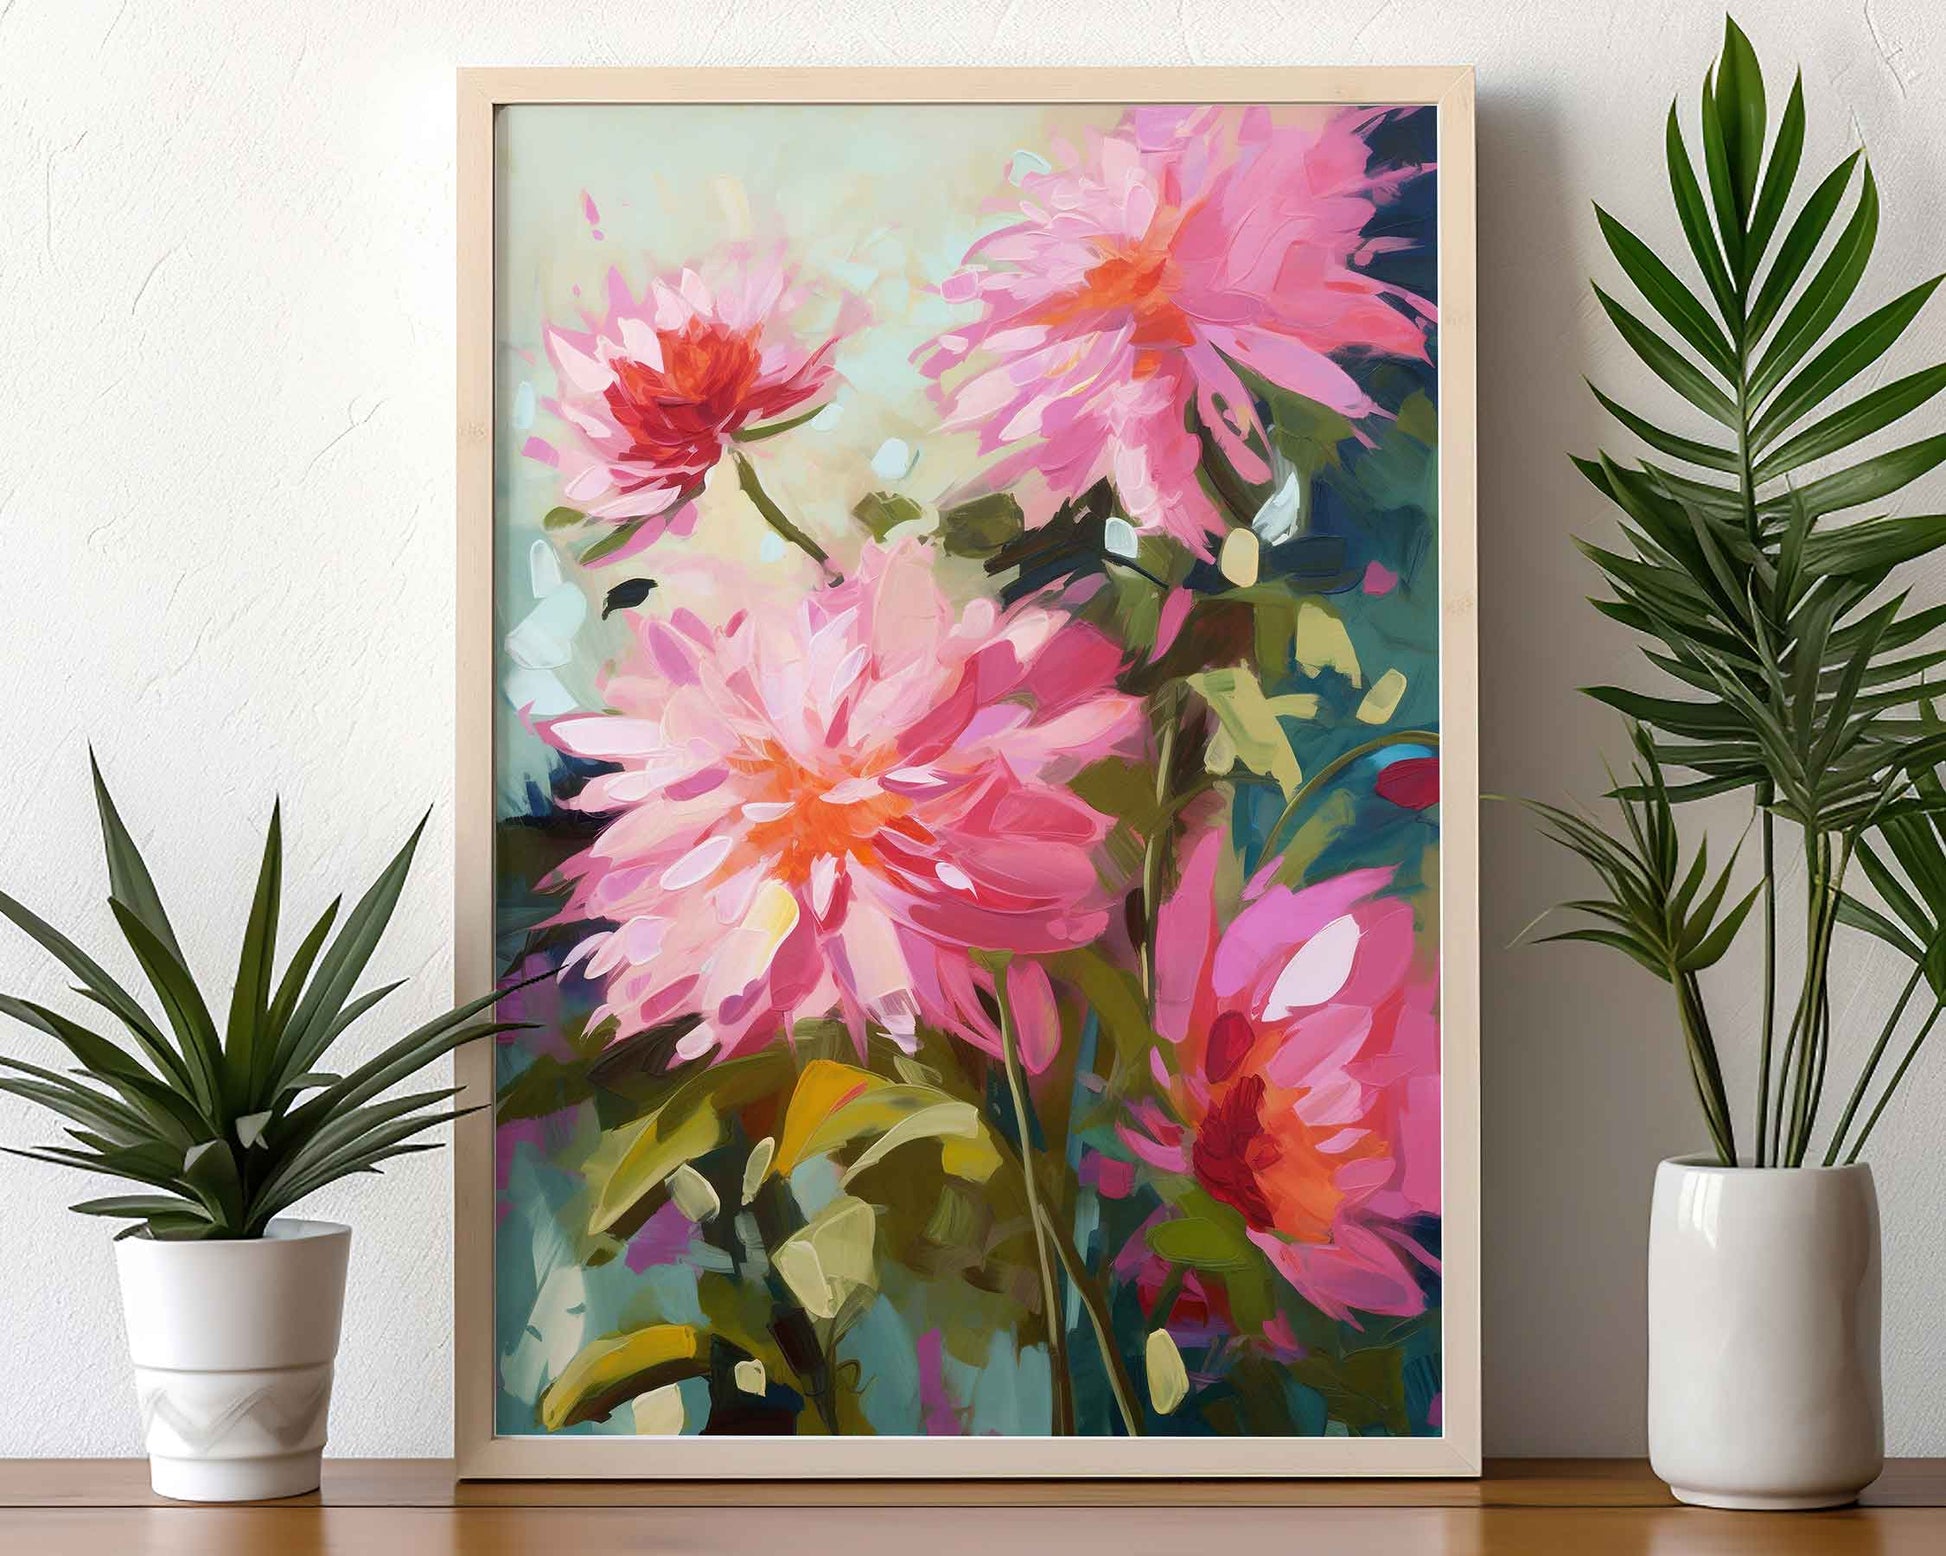 Framed Image of Abstract Vintage Pink Flowers Oil Paintings Wall Art Print Poster Gift